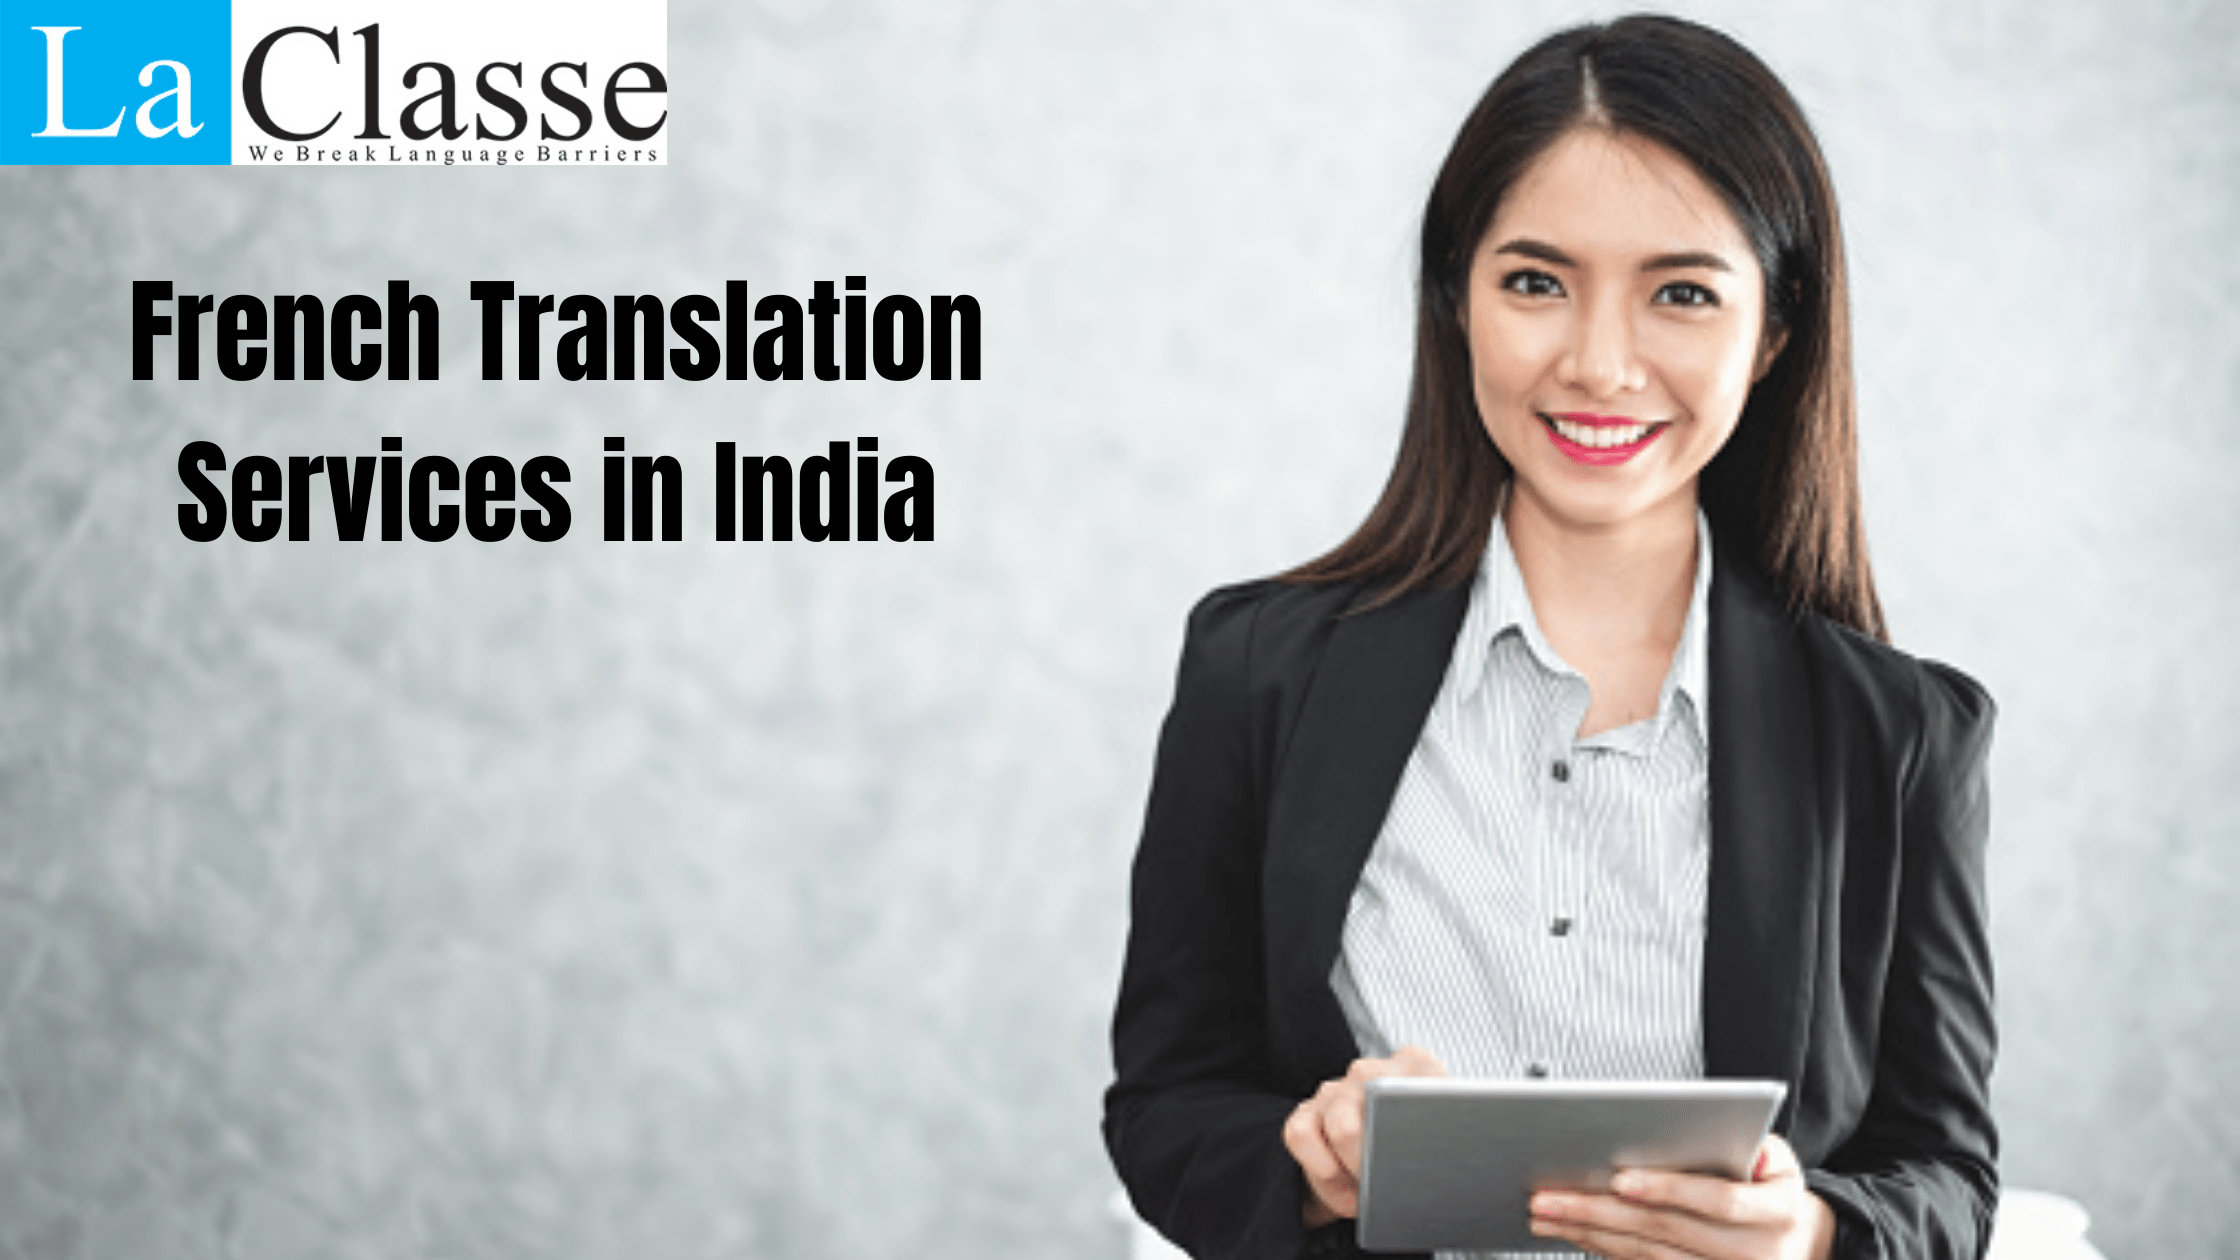 French Translation Services in India